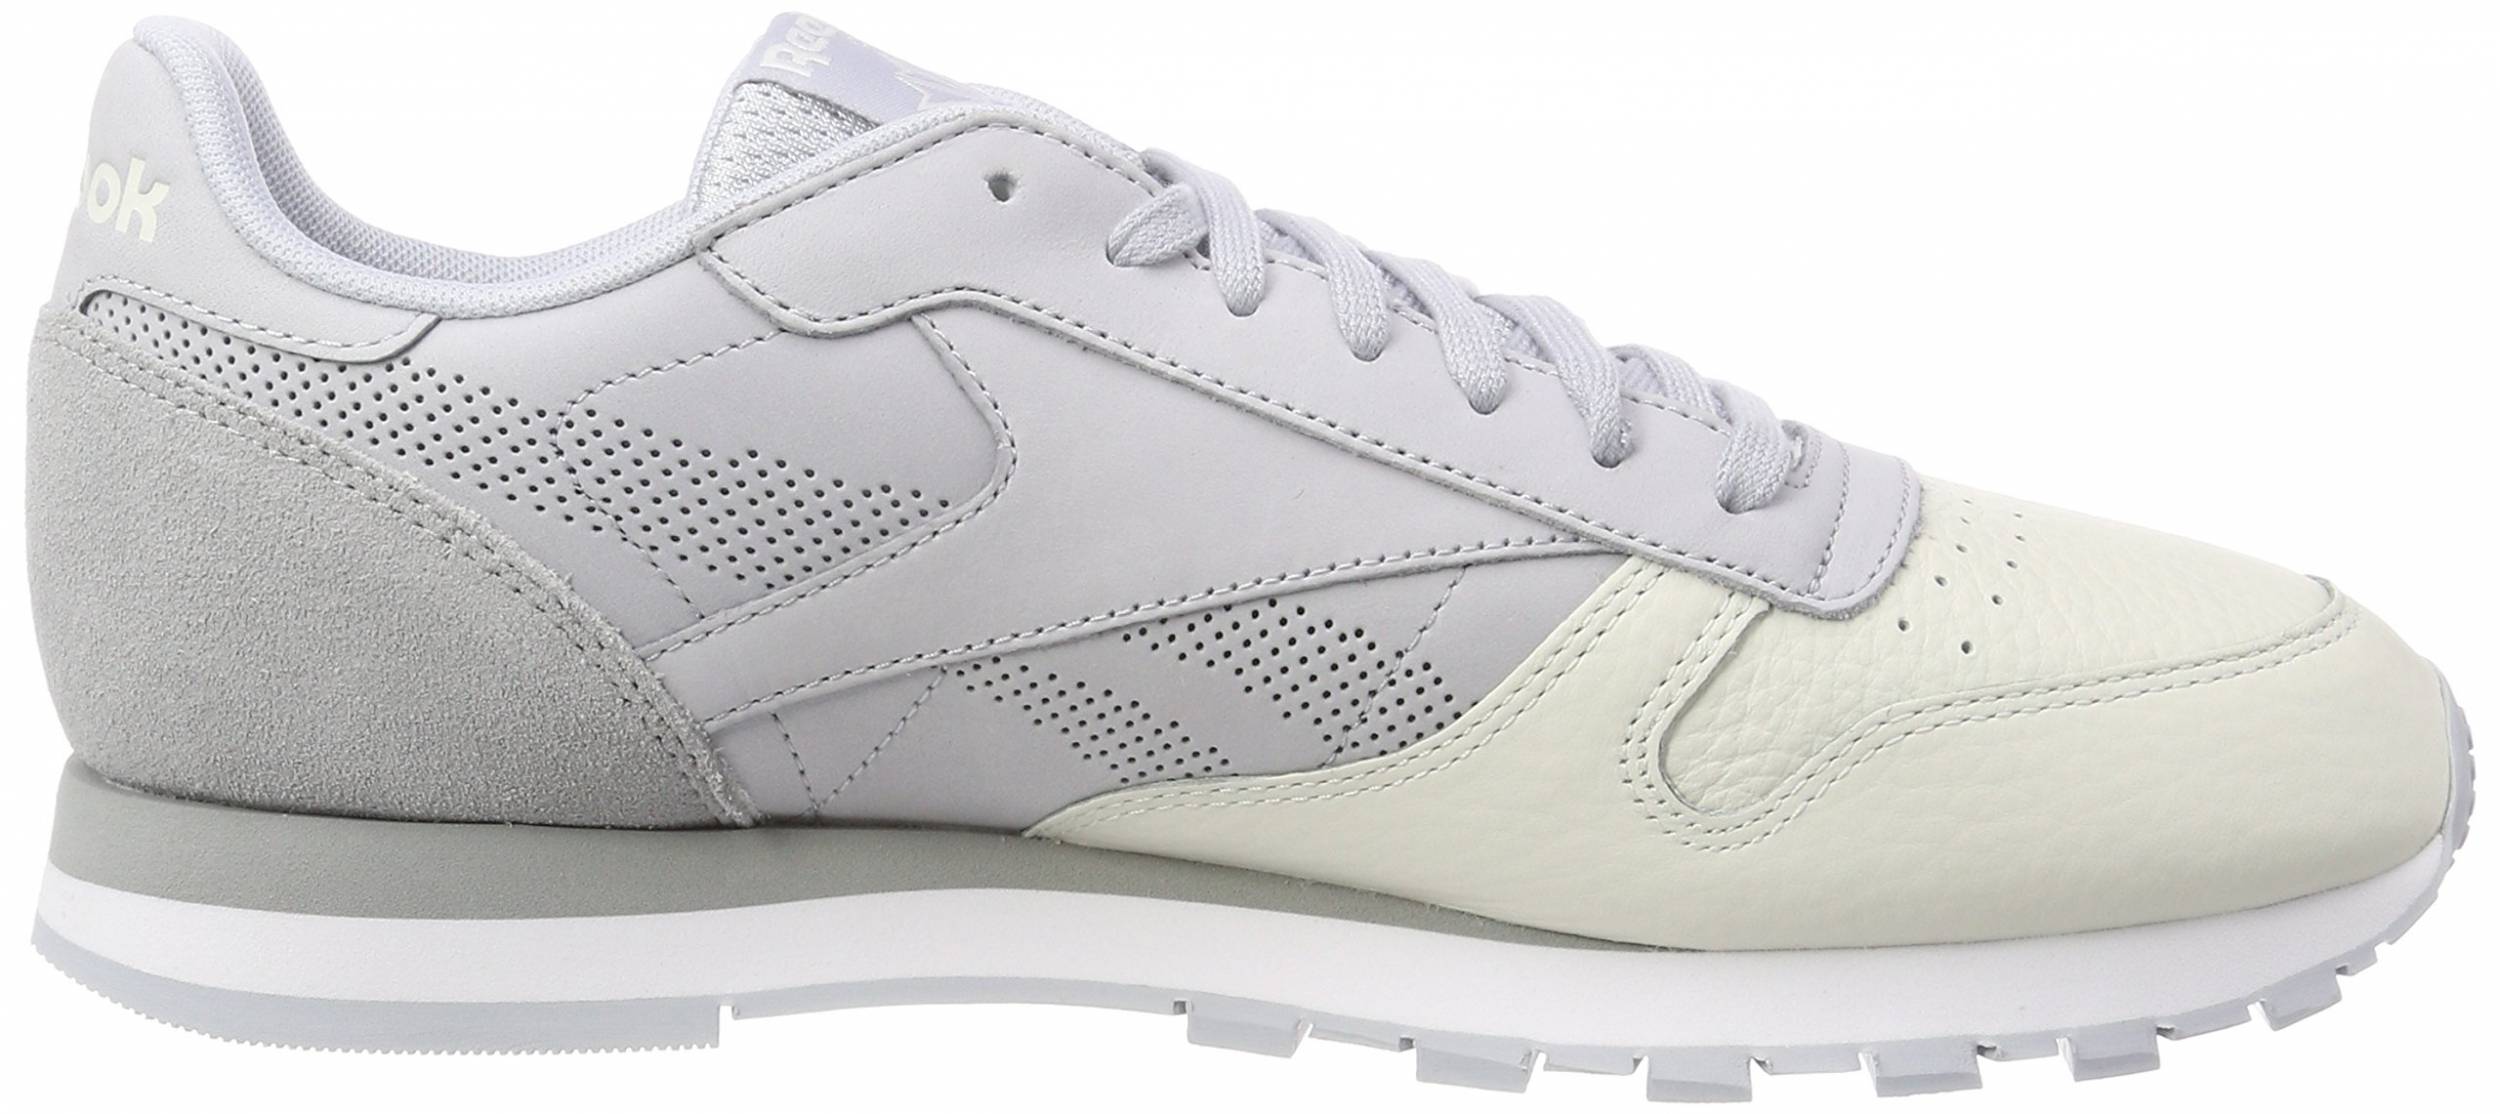 12 Reasons to/NOT to Buy Reebok Classic Leather UE (Nov 2020) | RunRepeat